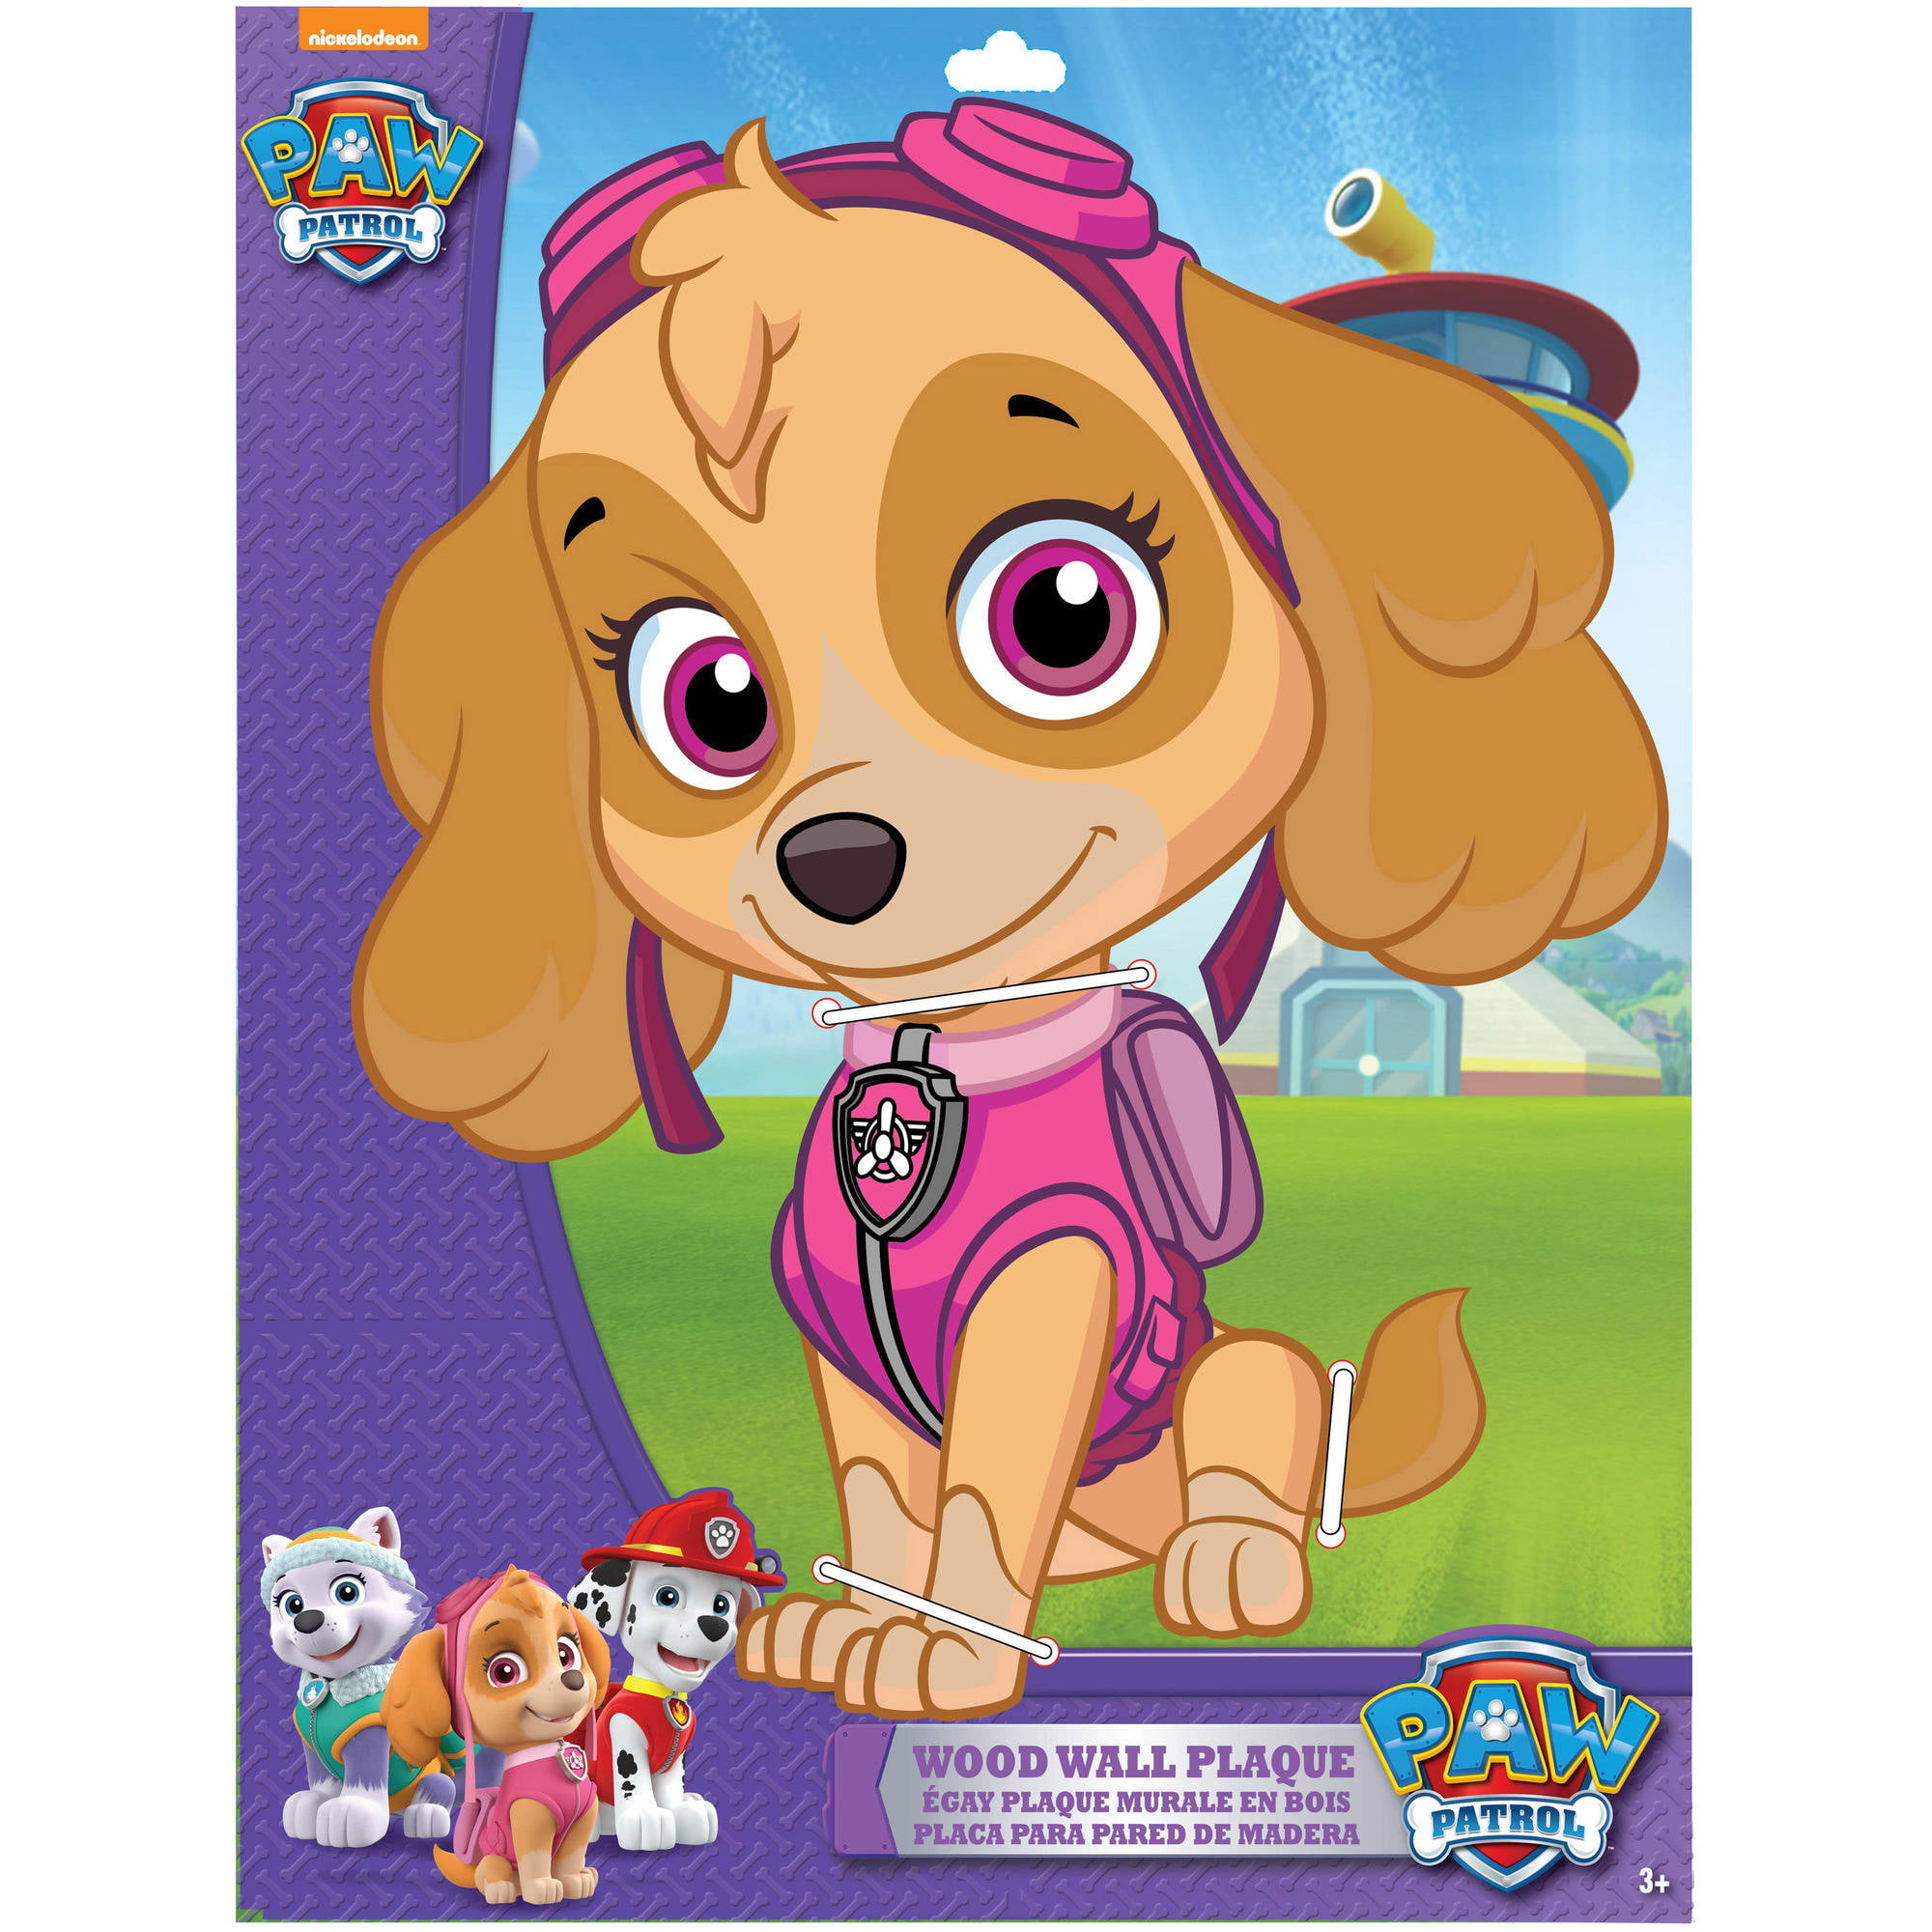 PAW PATROL PINK CANVAS WALL ART PLAQUES/PICTURES 